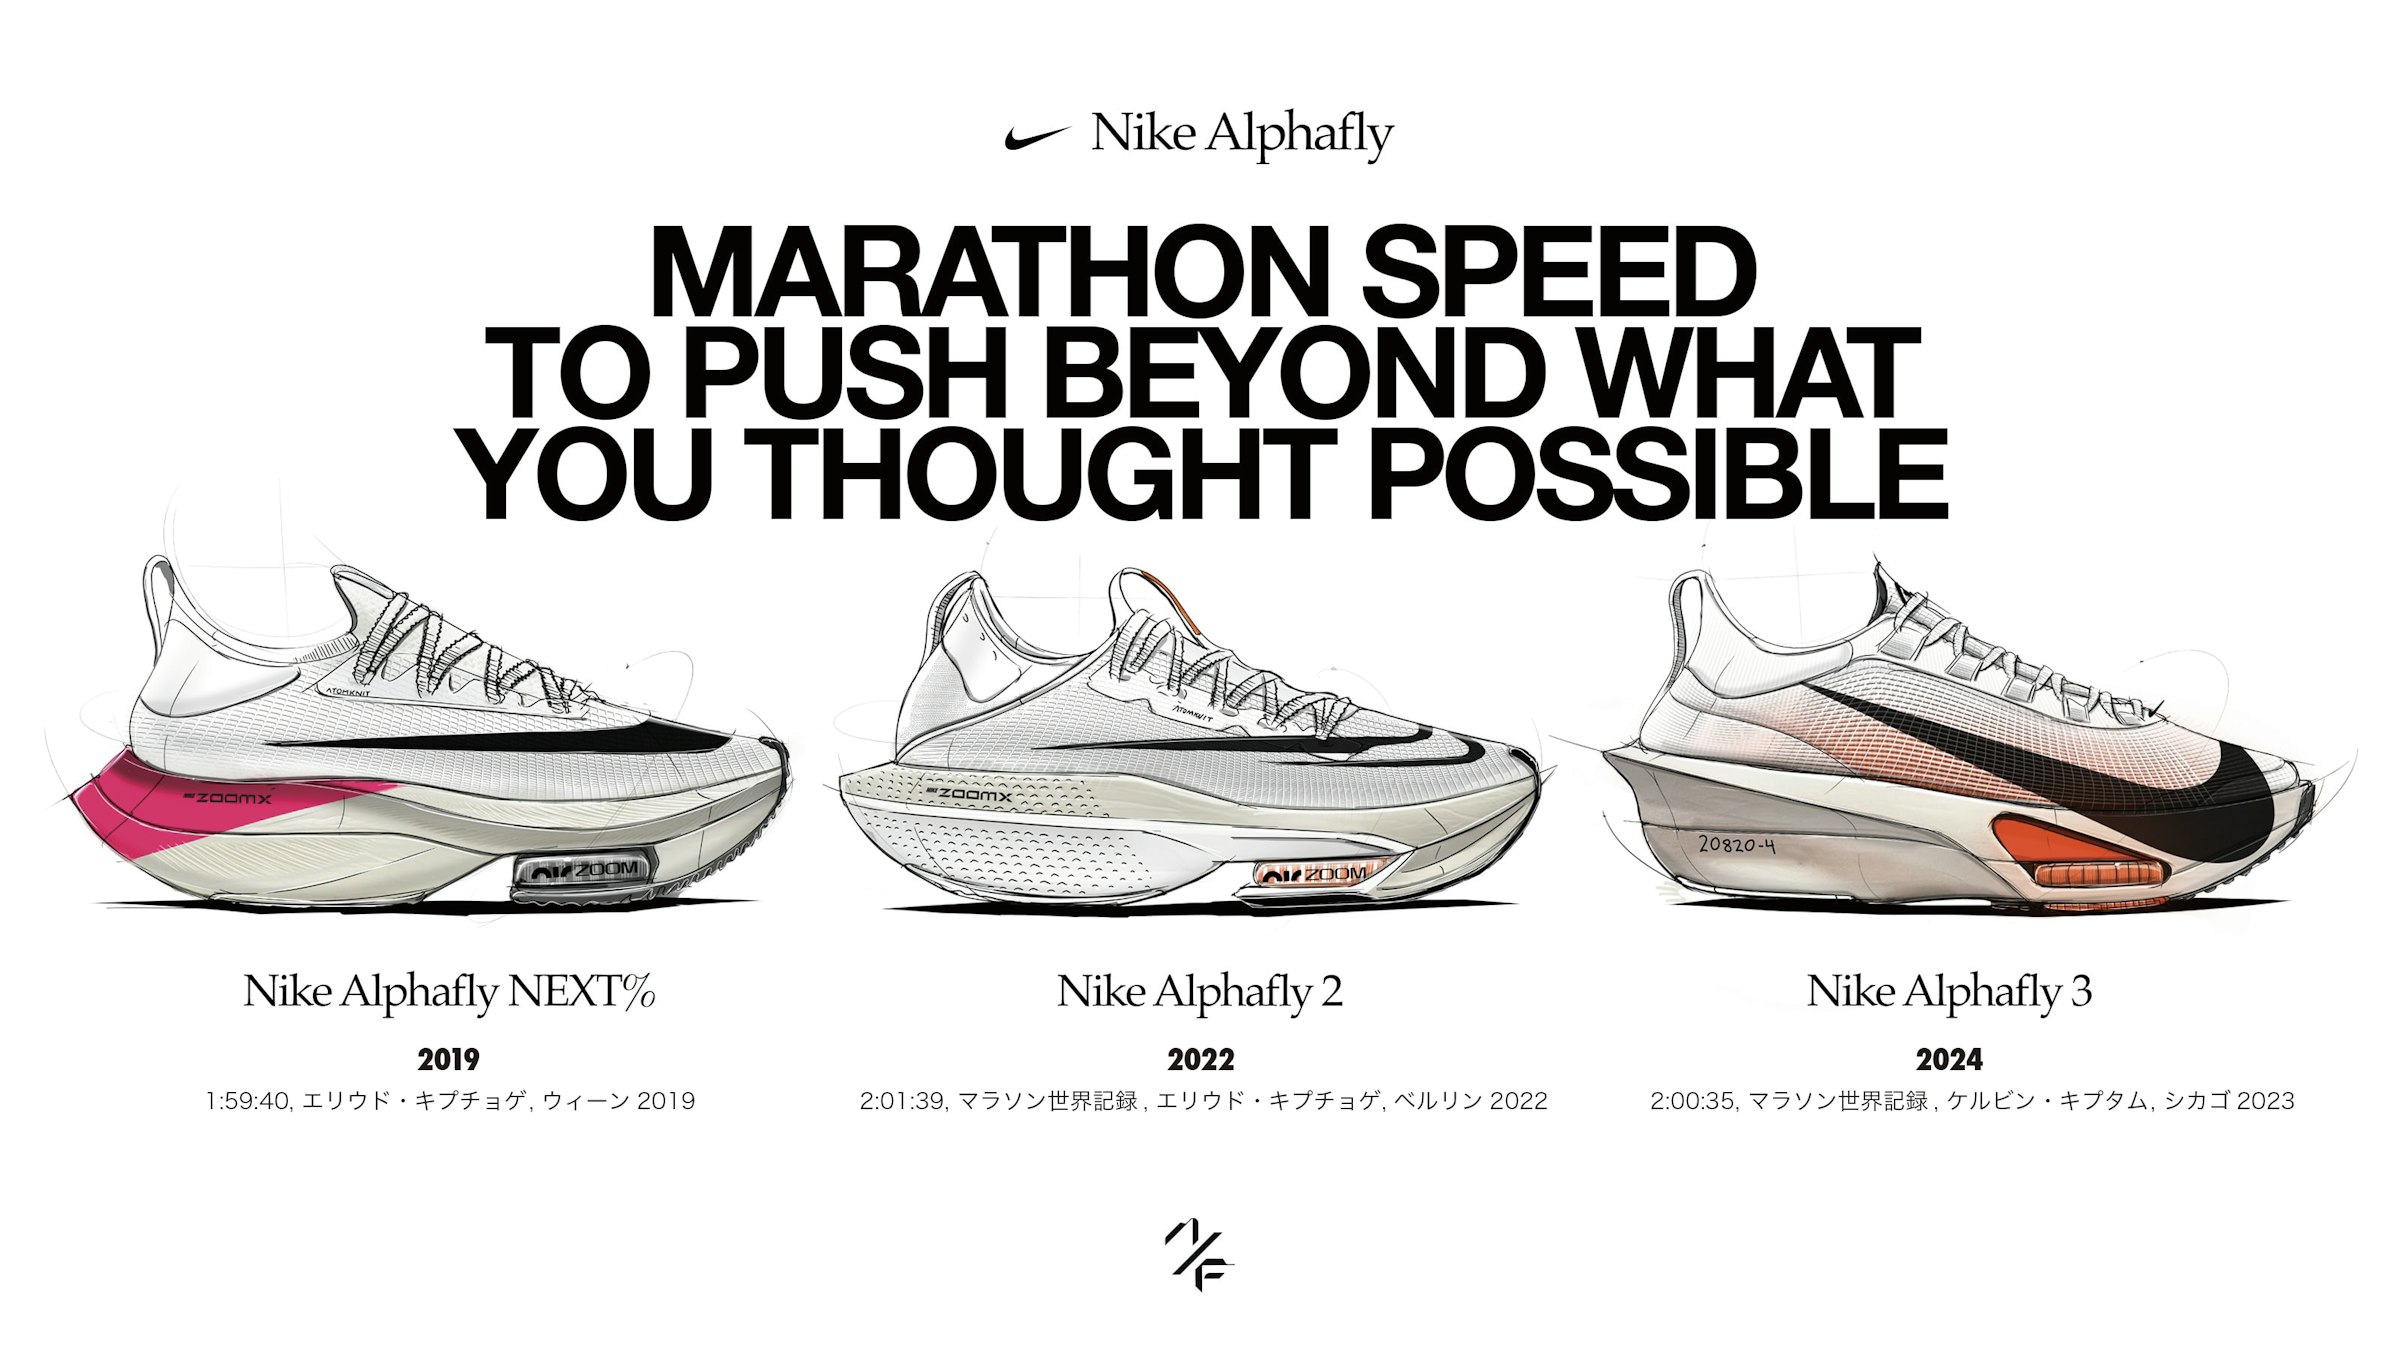 The 'AlphaFly' series, which has consistently broken numerous records along with the athletes.